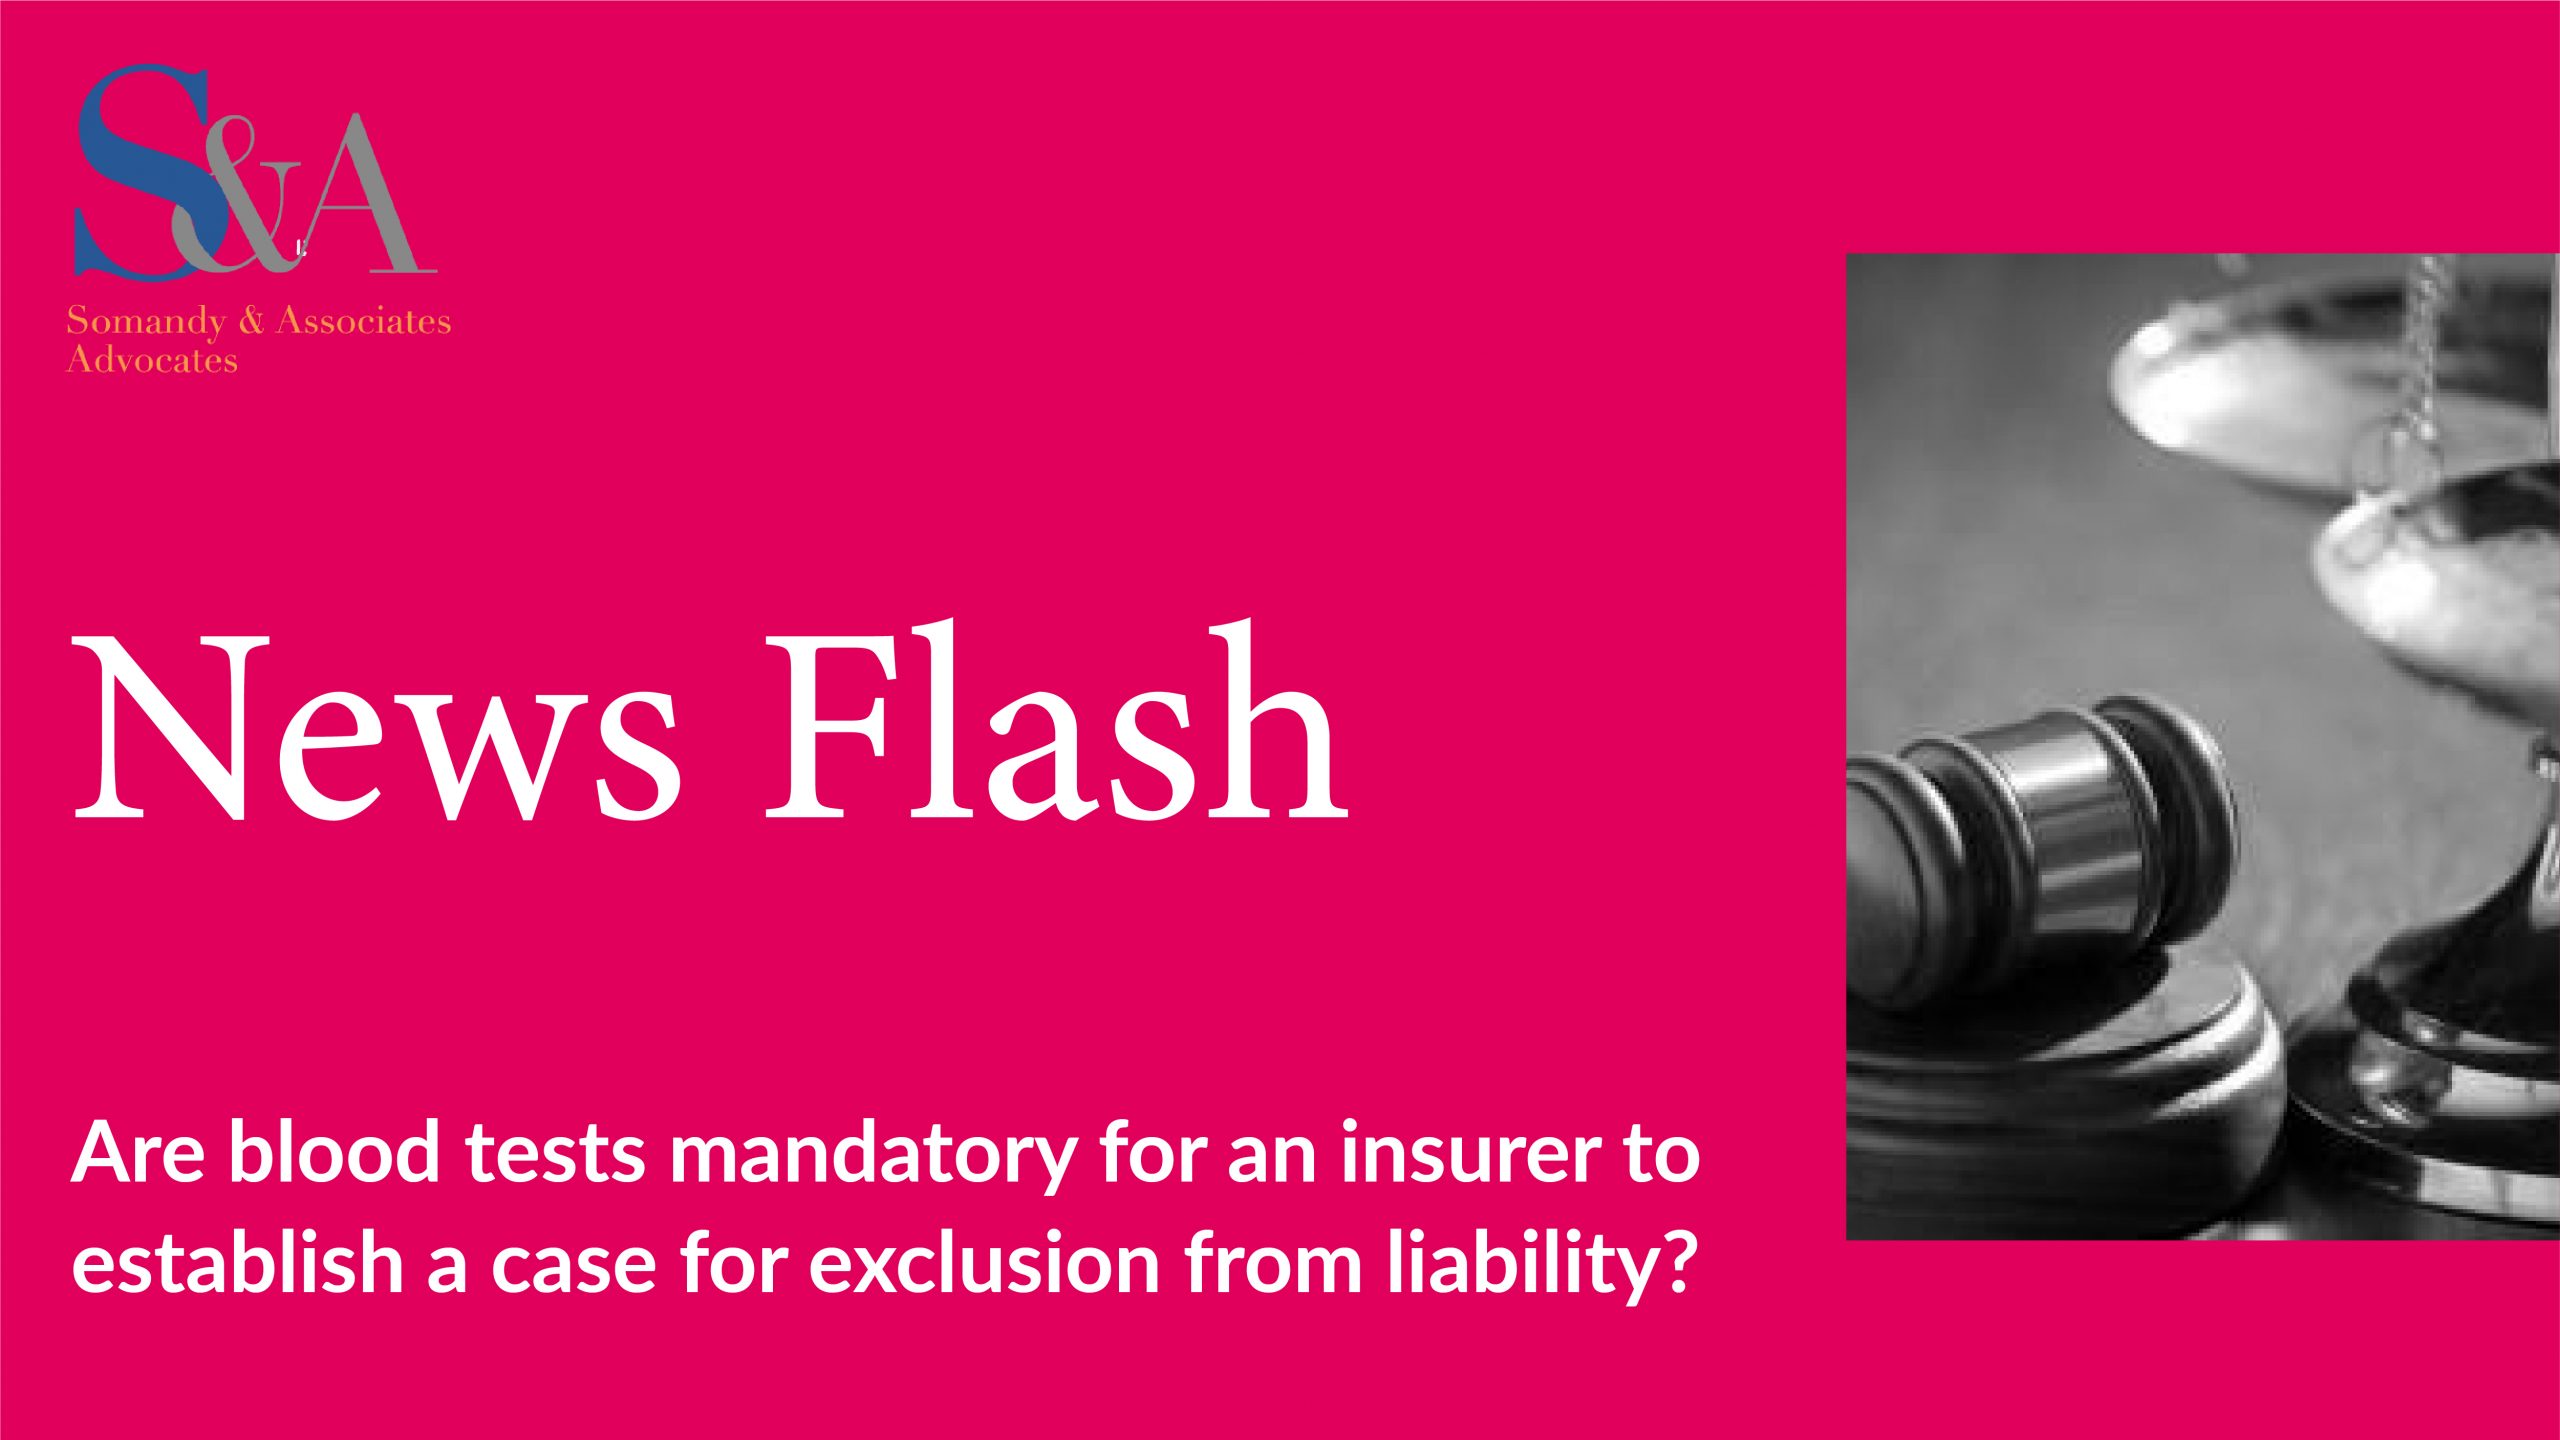 Are blood tests mandatory for an insurer to establish a case for exclusion from liability? Examining Section 185 of the Motor Vehicles Act,1988.